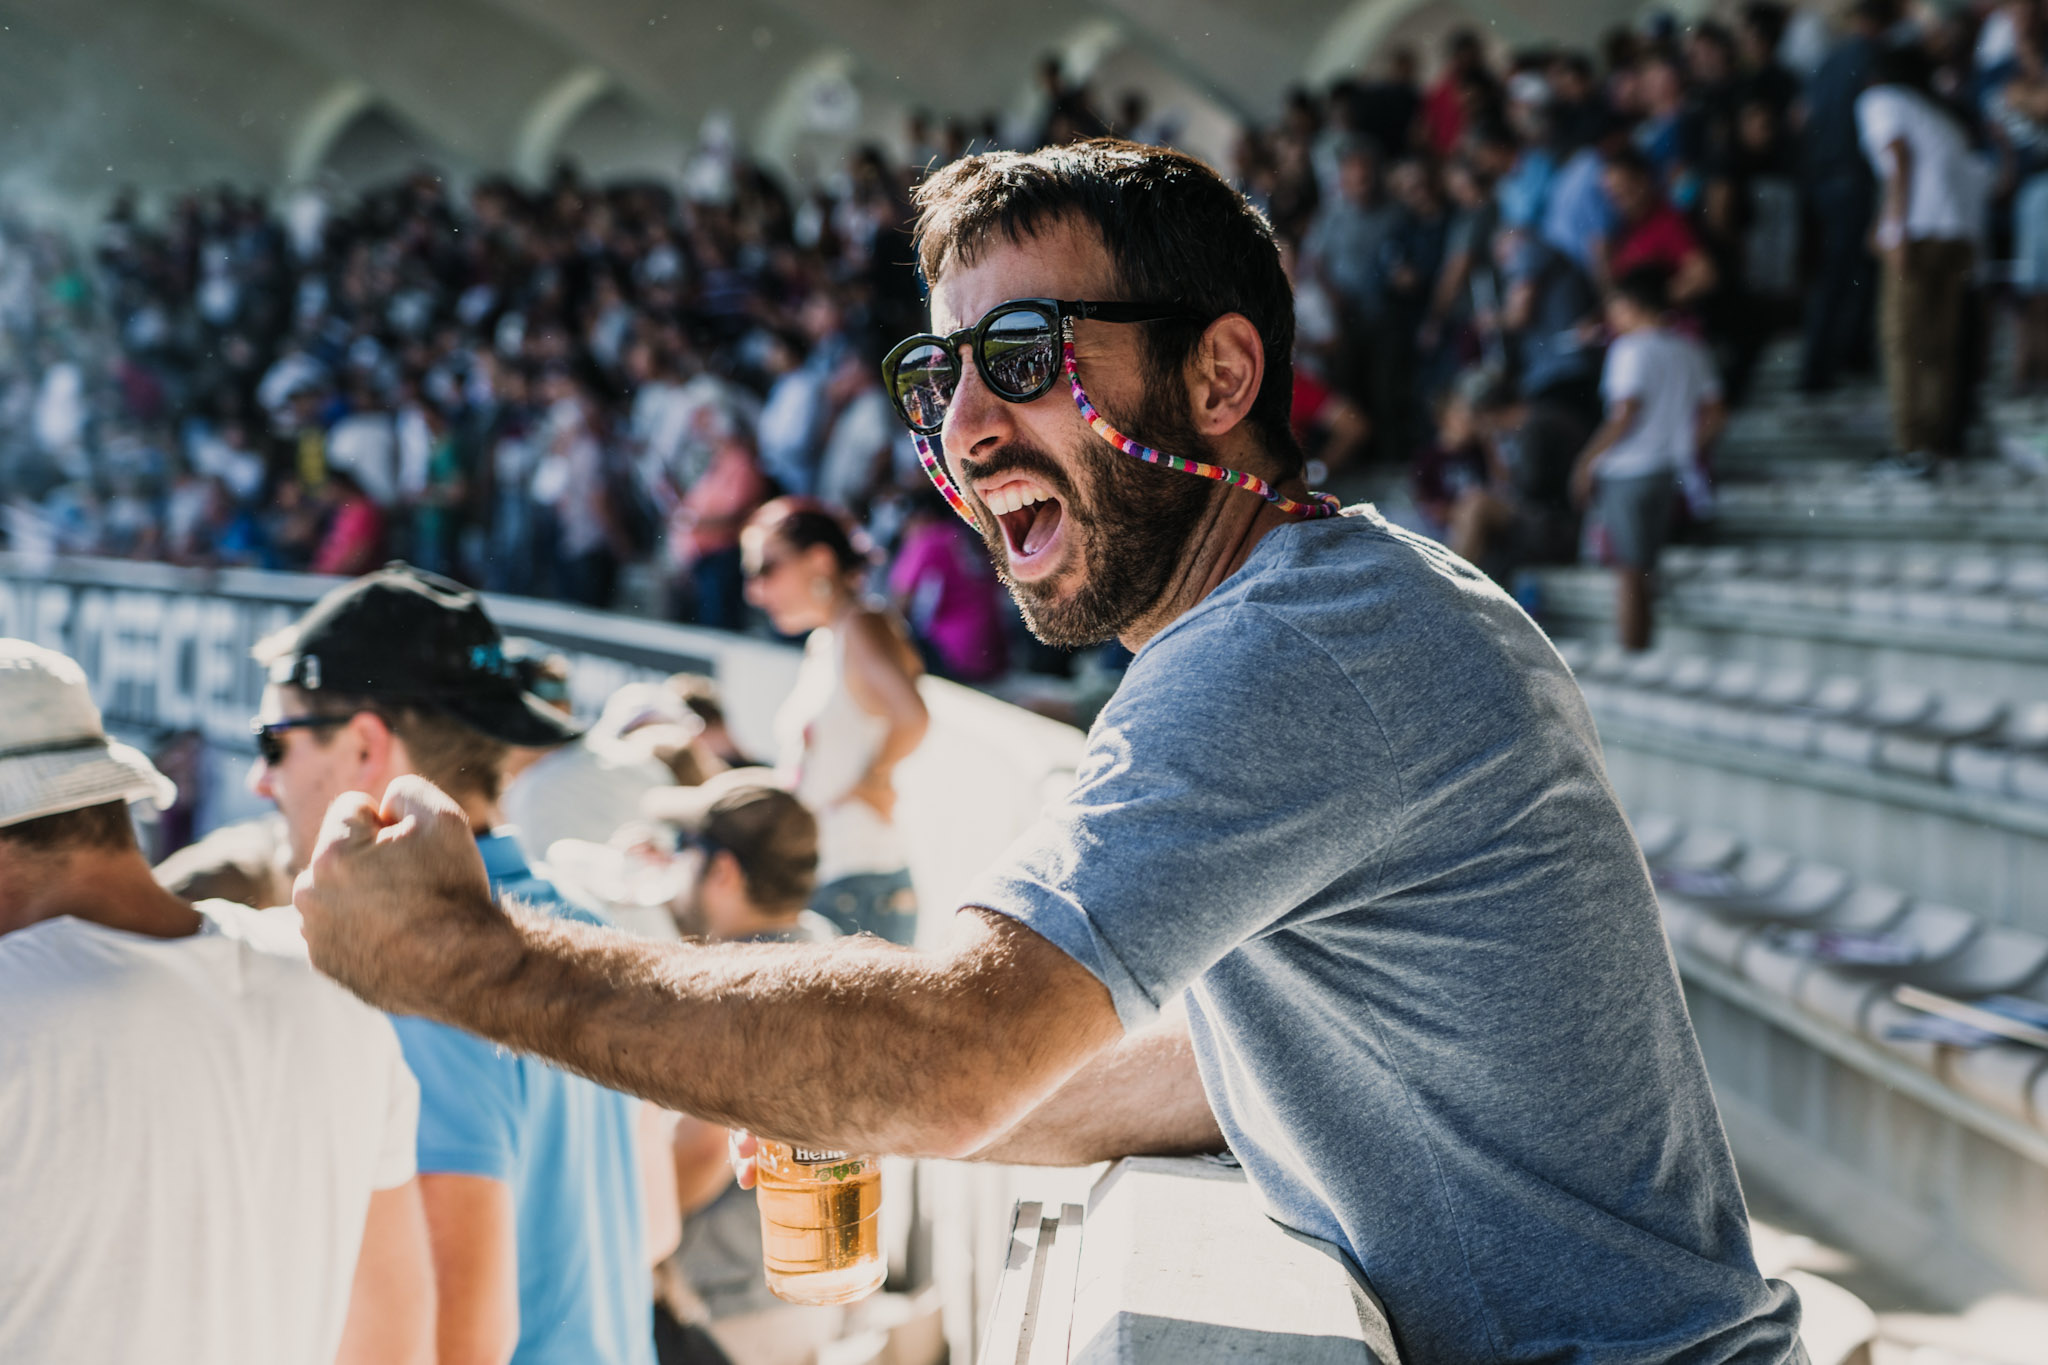 stock image of a happy bearded man in the stands at a stadium enjoying a rugby match